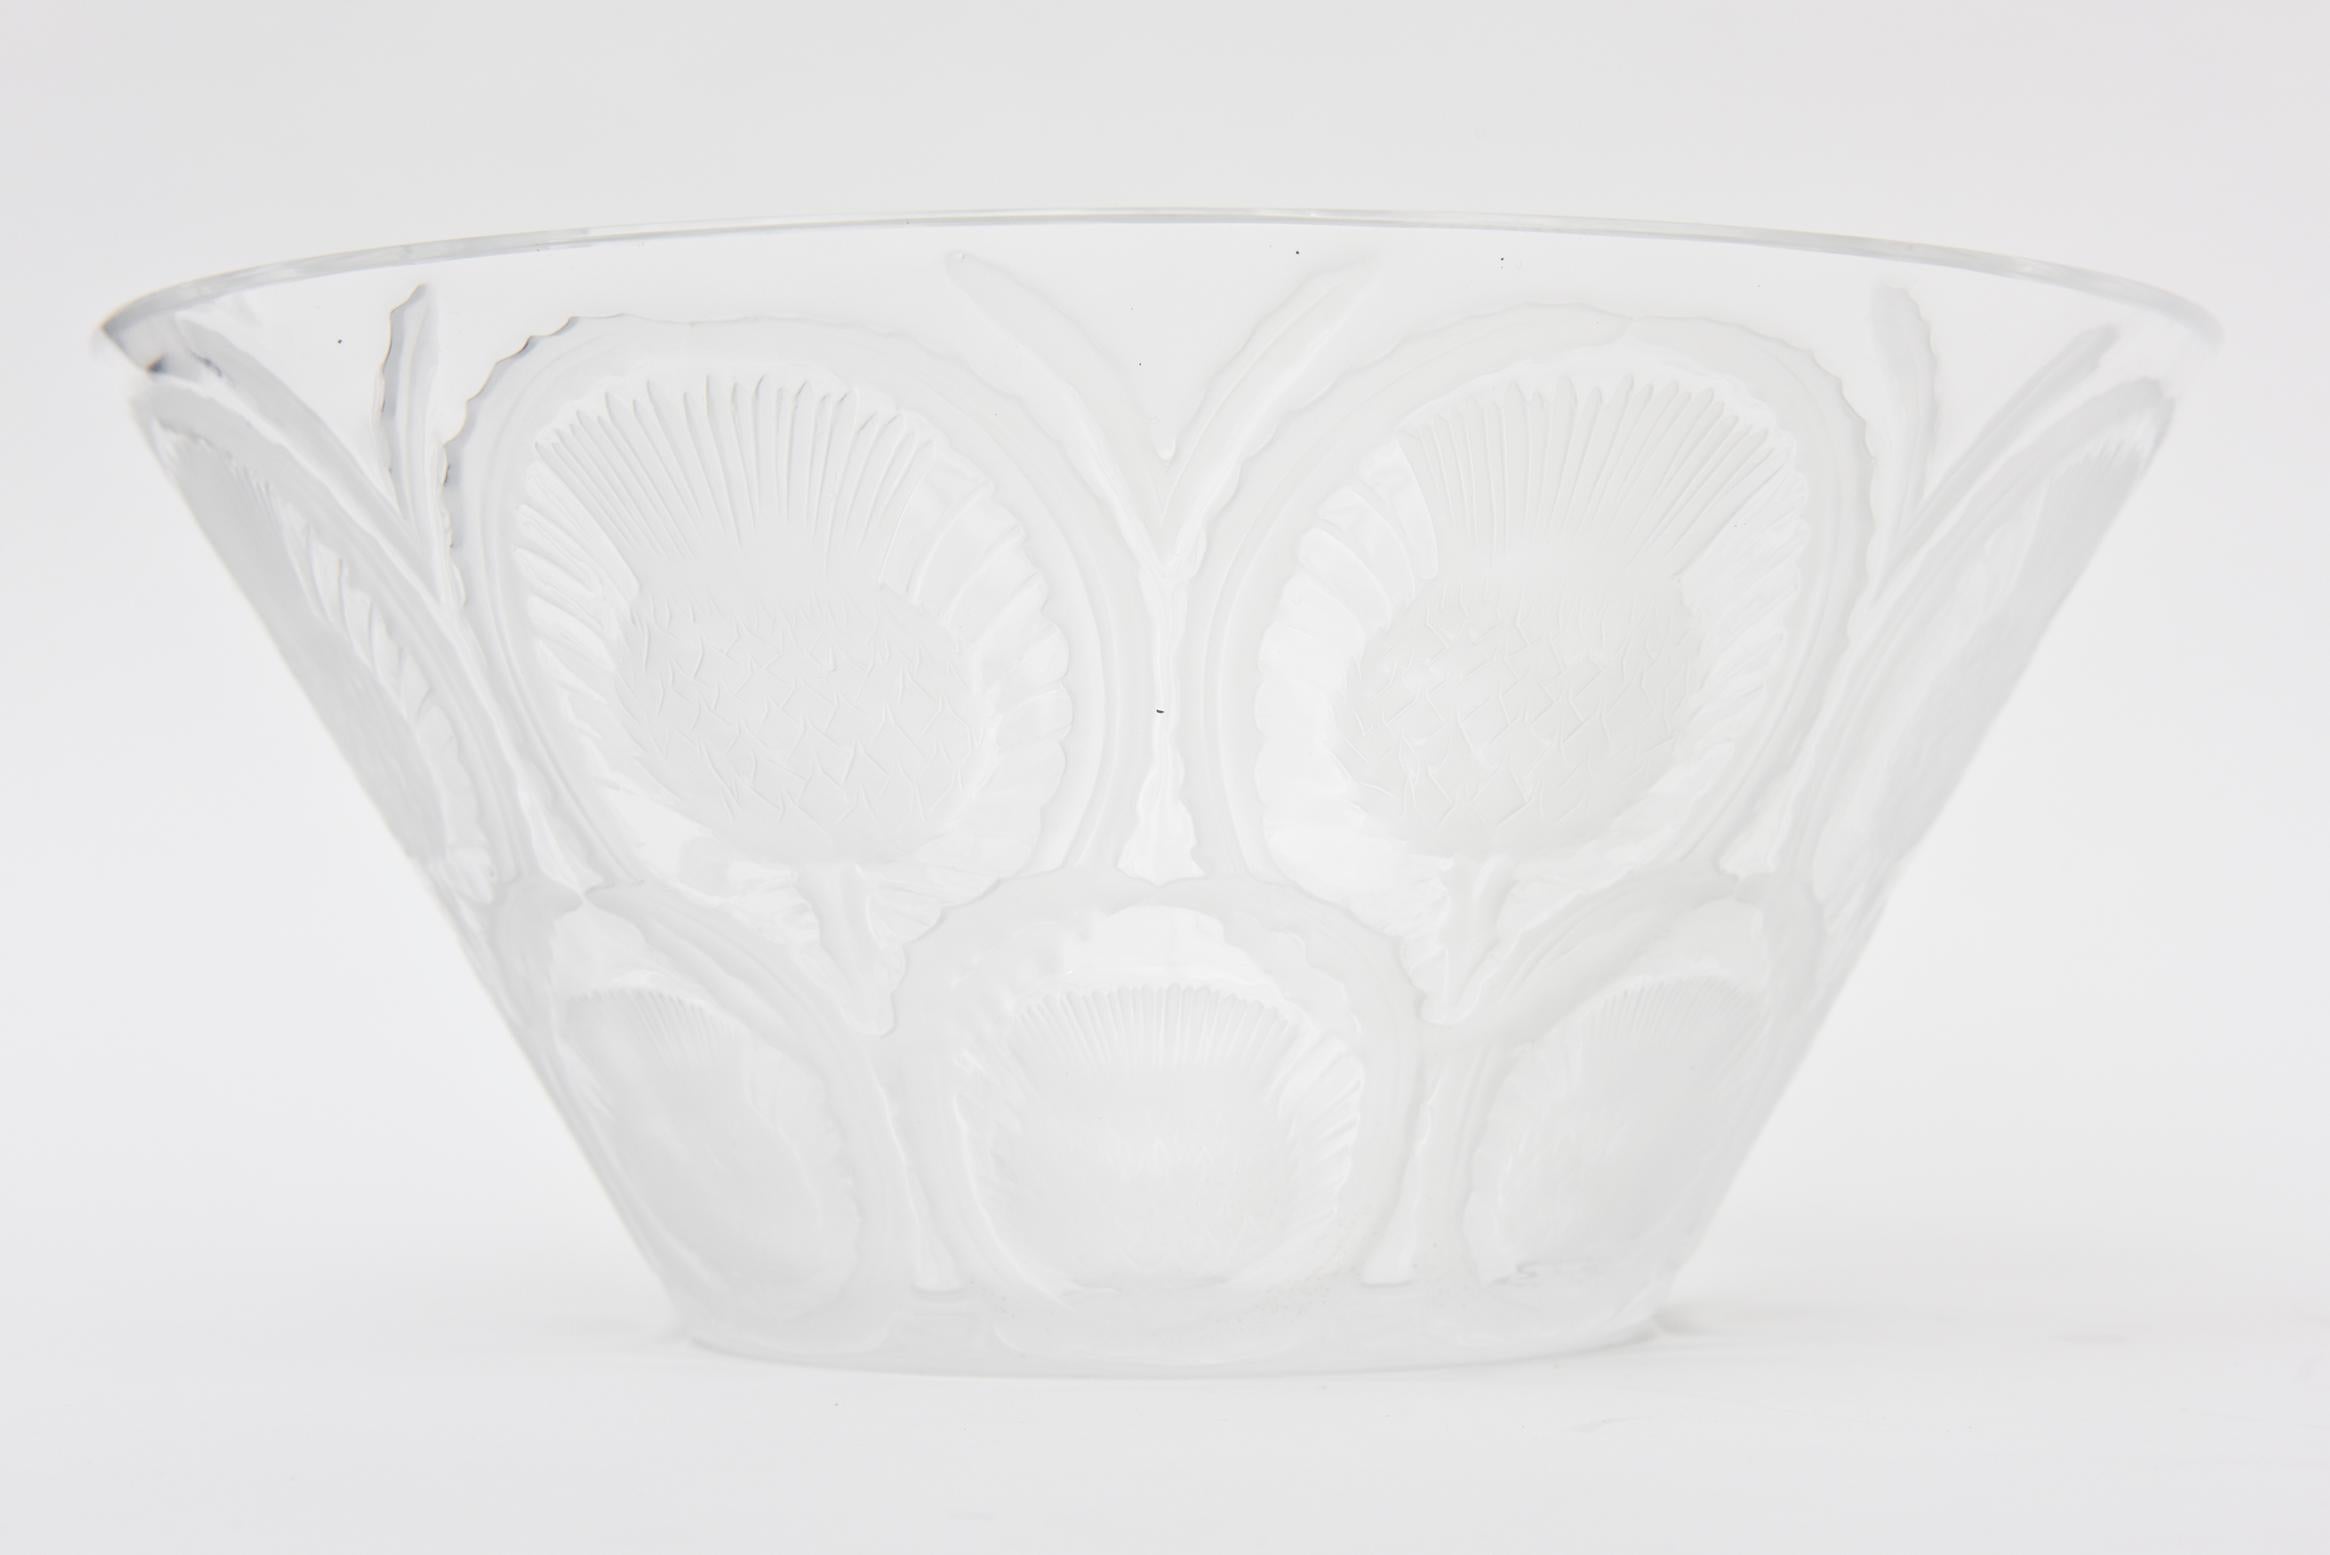 This lovely French signed Lalique molded glass bowl has alternating and repeated patterns of both frosted and clear glass embossed images of thistles. It is 20th century, France. Classic. This would make an elegant serving bowl or a small